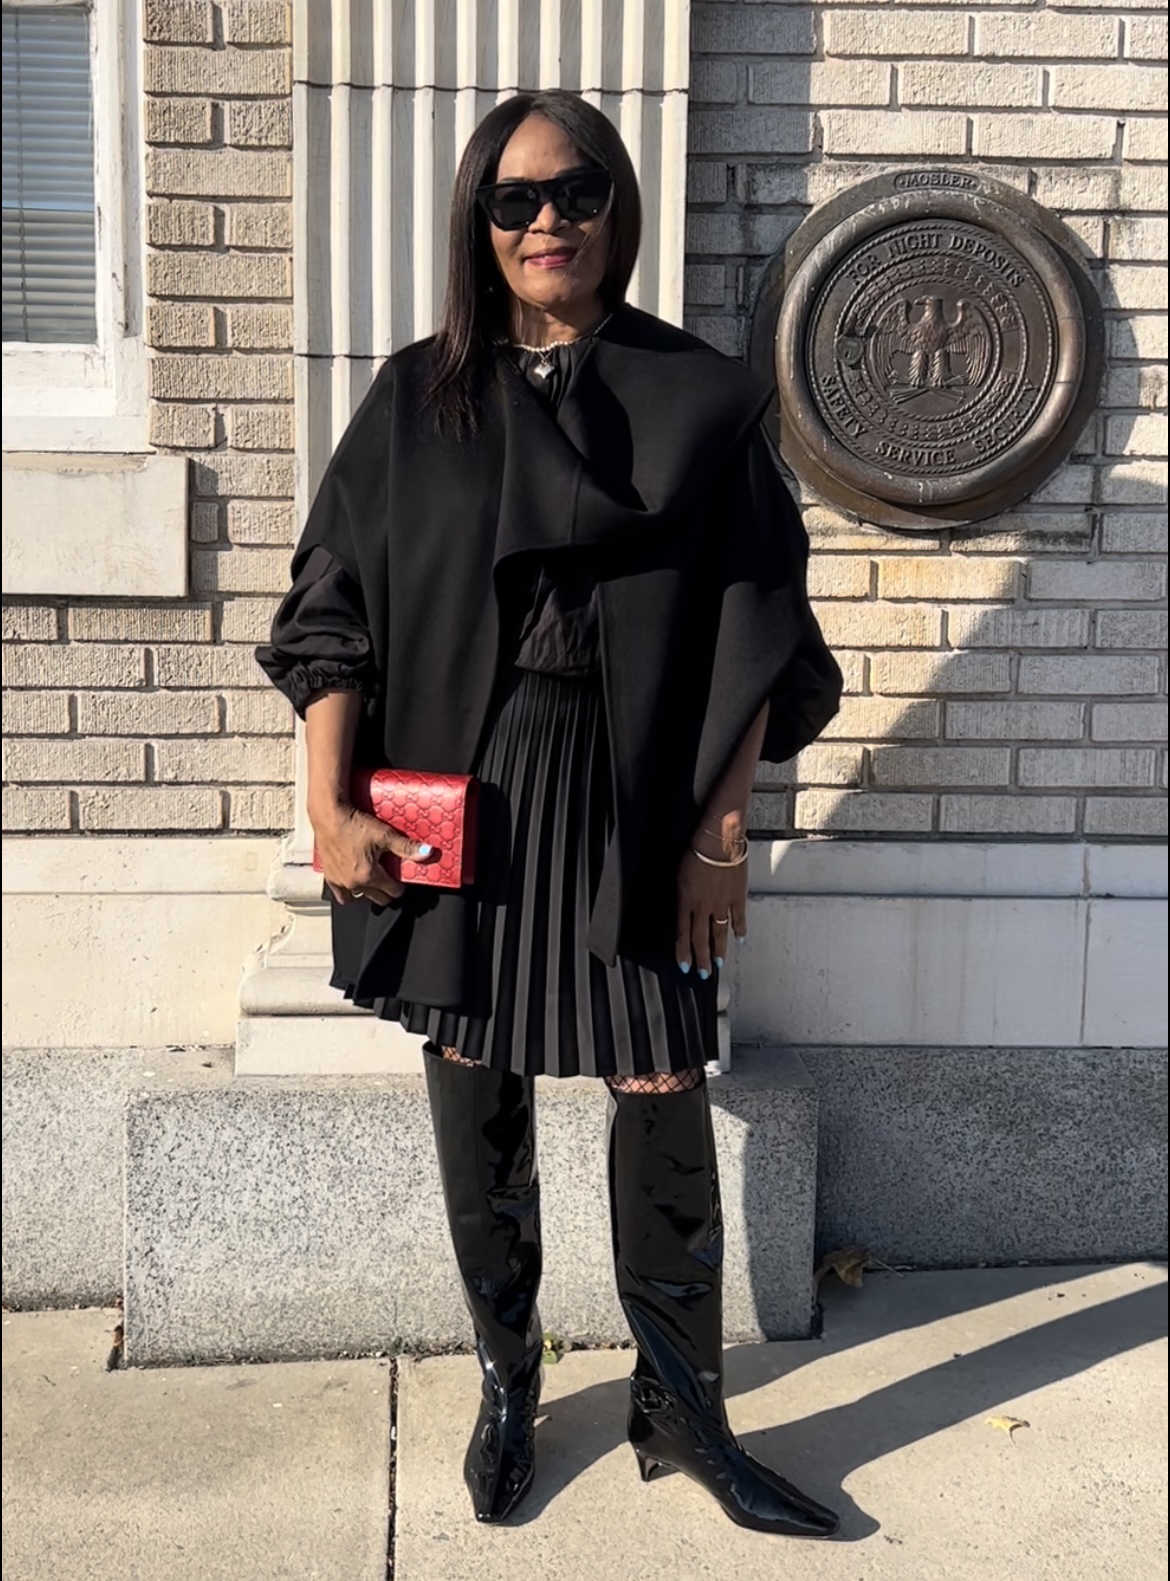 Over 60 style: all black with pop of red